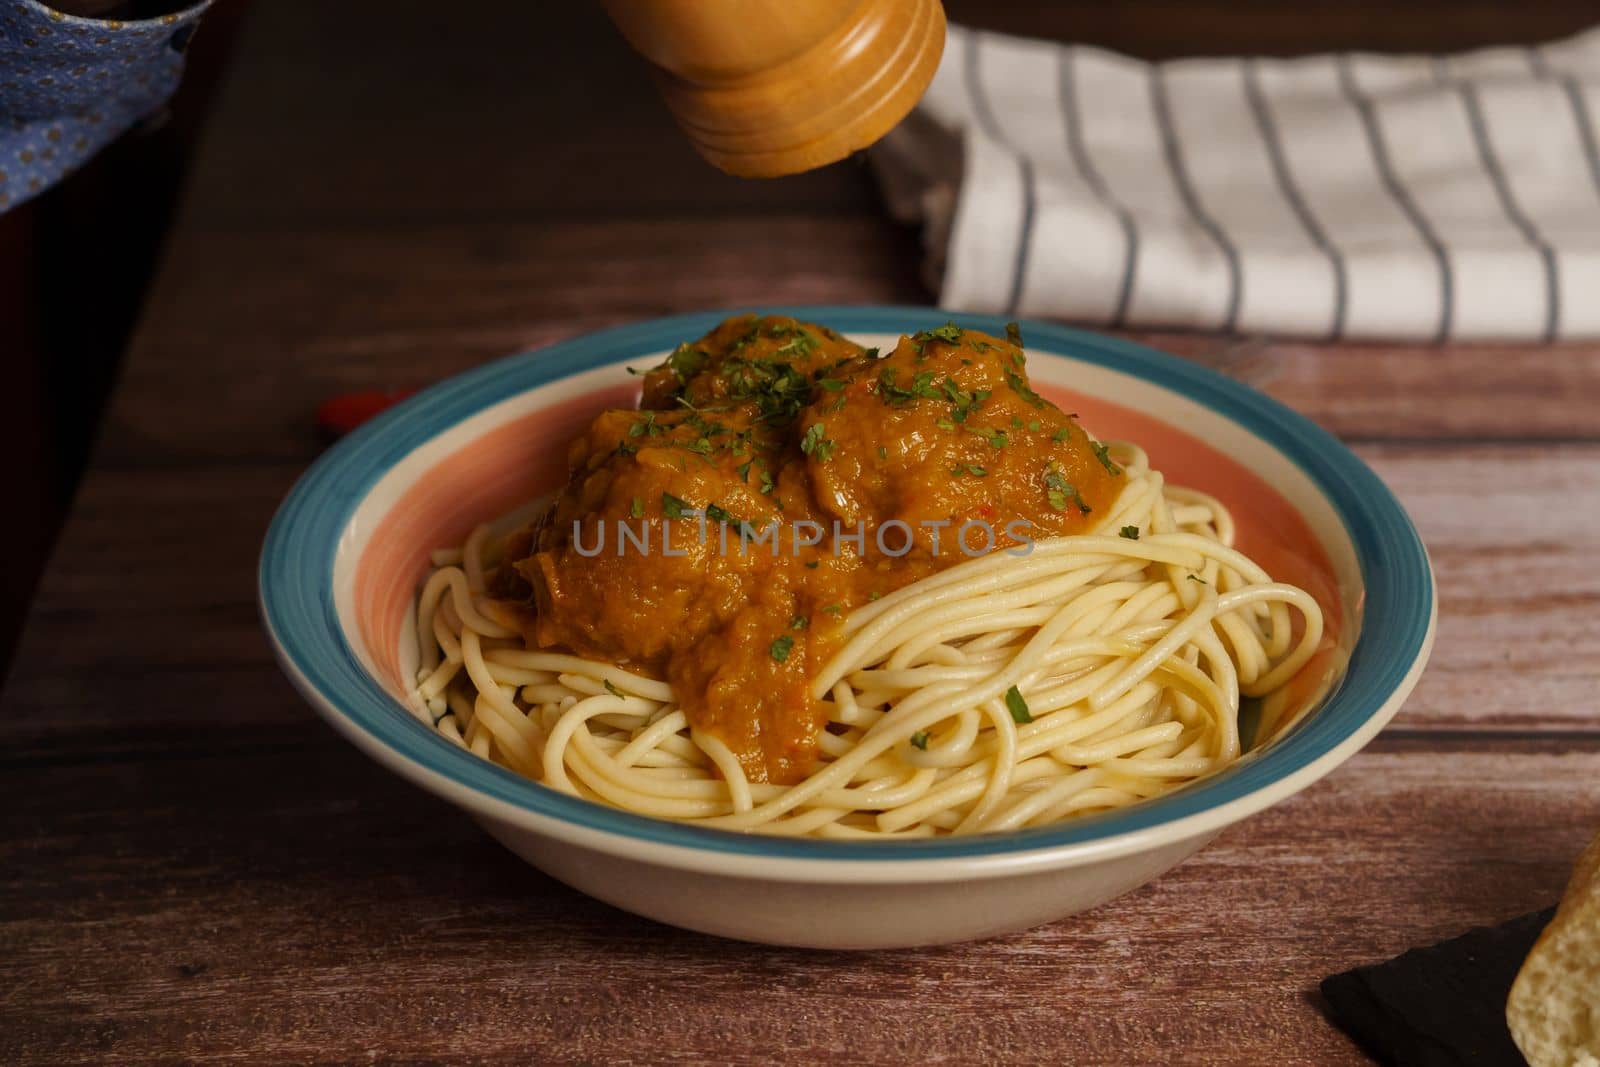 close-up of a plate of meatballs with spaghetti and parsley, pouring pepper, on a wooden table